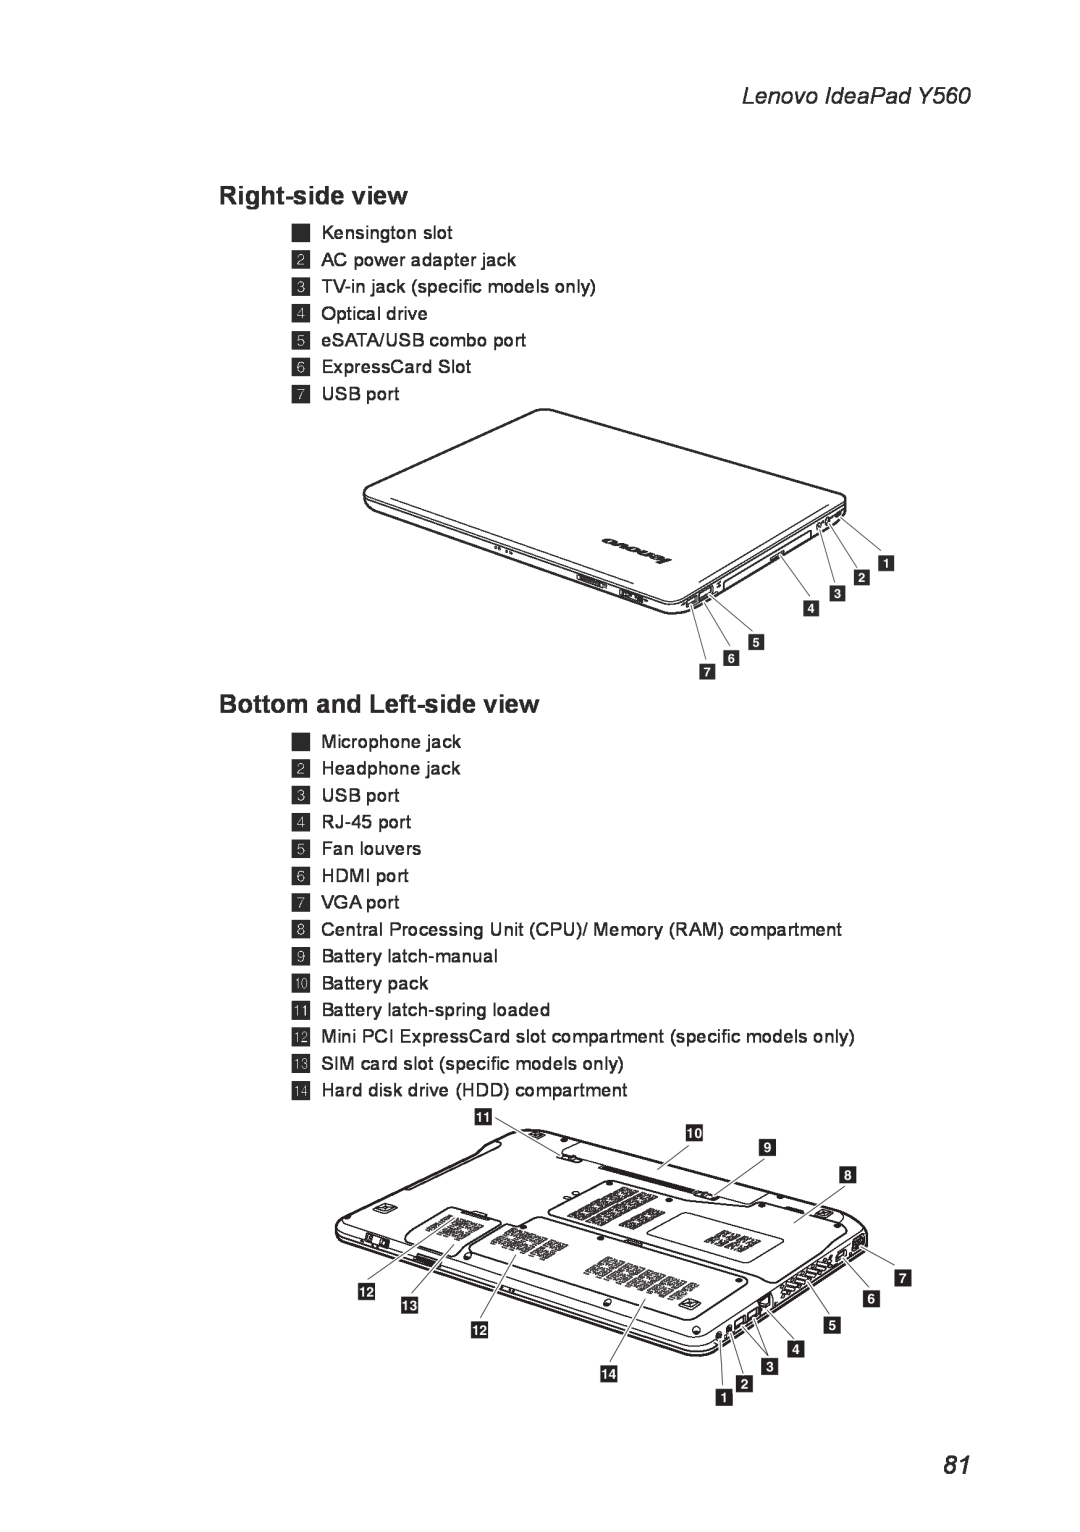 Lenovo manual Right-side view, Bottom and Left-side view, Lenovo IdeaPad Y560 